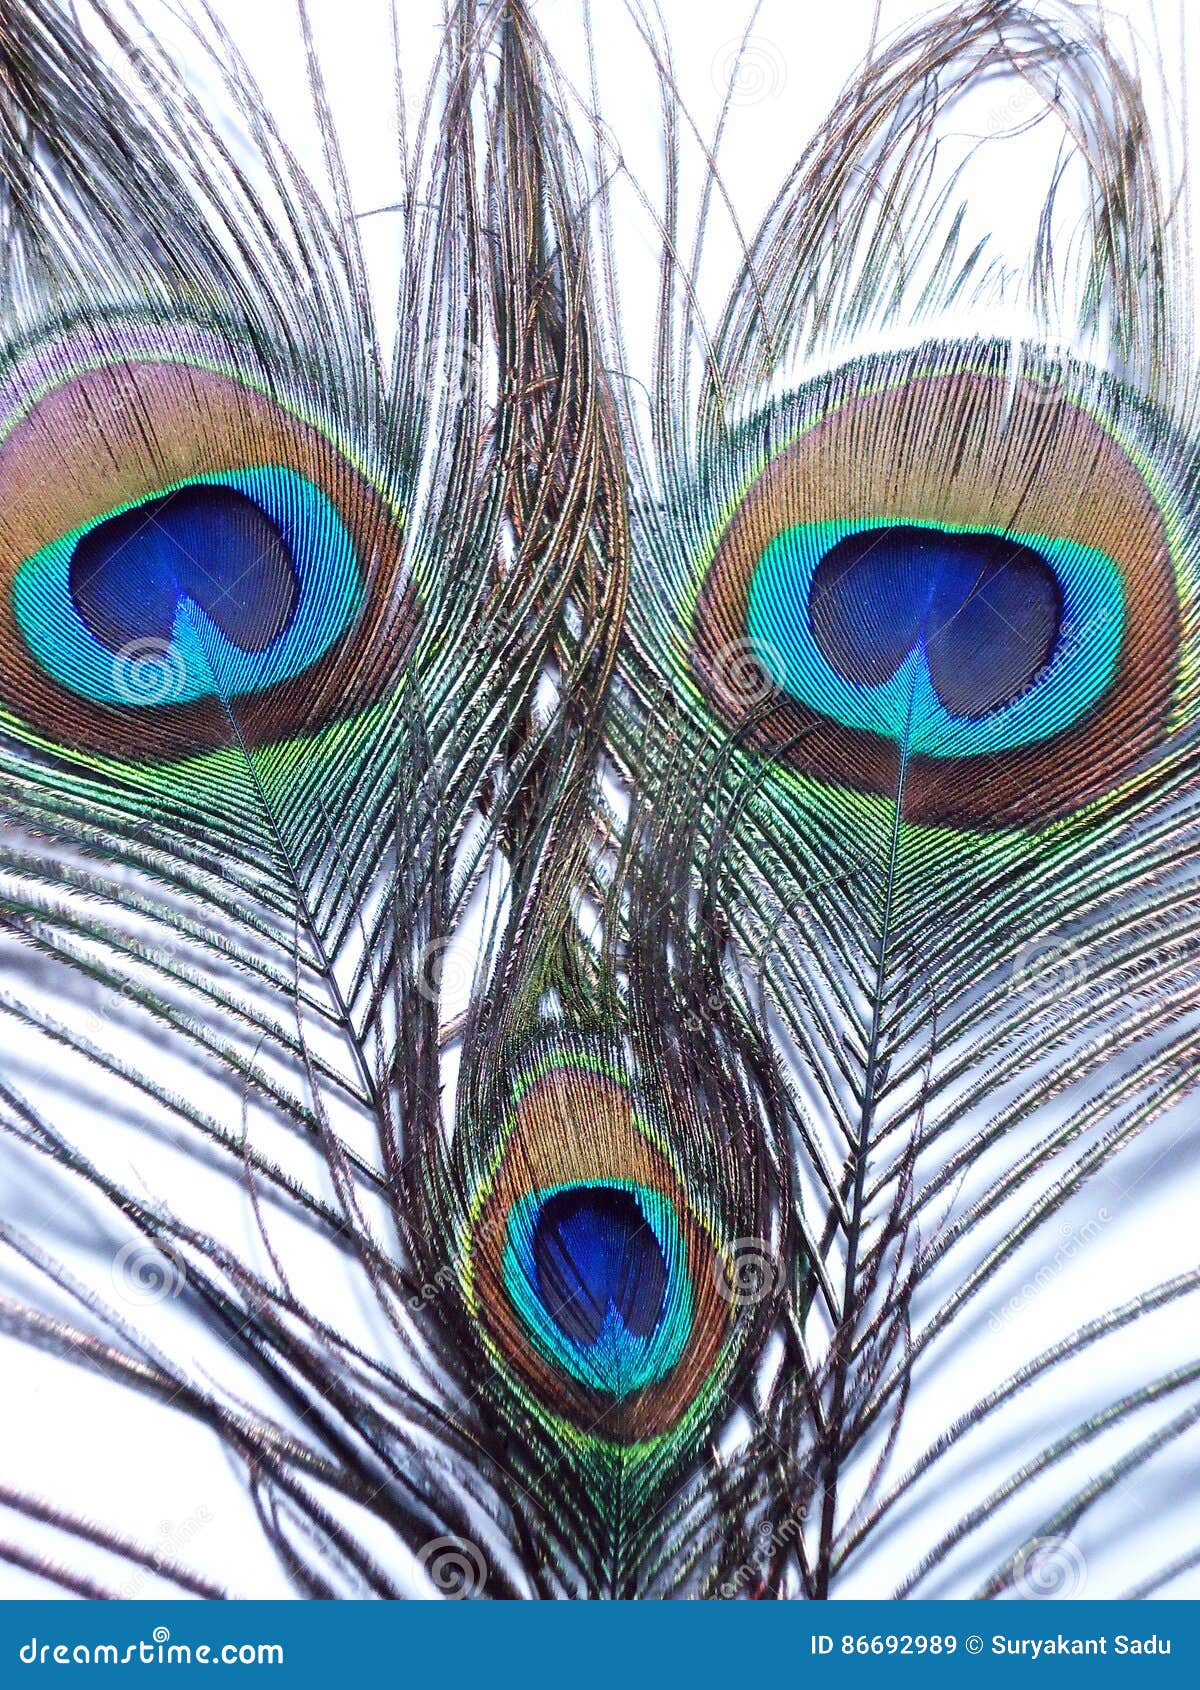 Feathers of Peacock or Peahen Stock Image - Image of peacock, indian ...